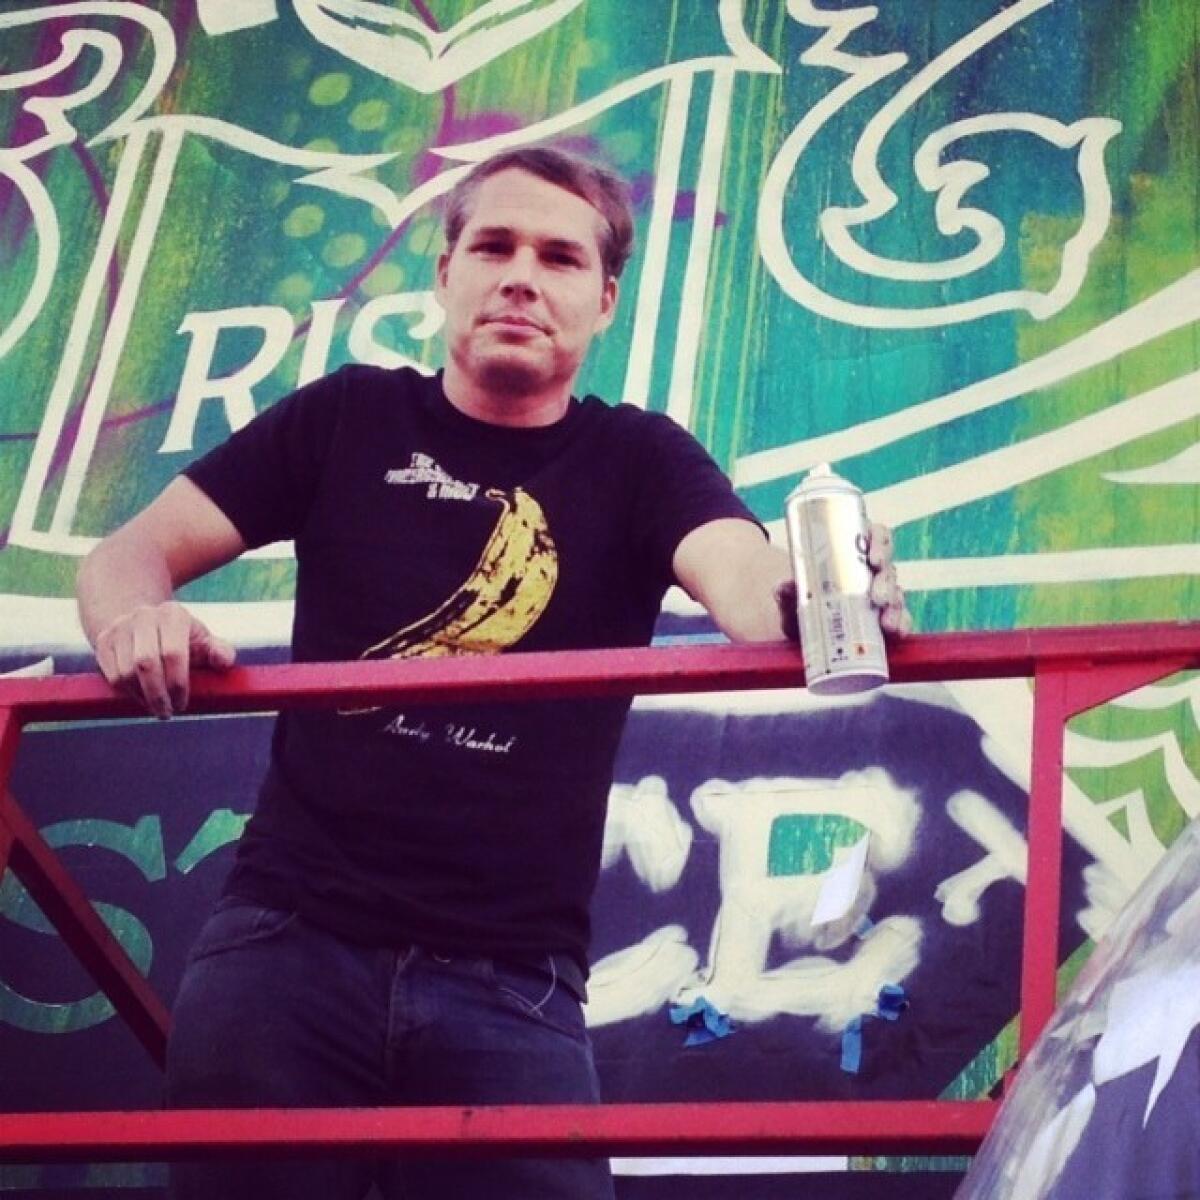 Shepard Fairey on a break from stenciling a mural that he's creating on L.A.'s skid row with fellow street artist RISK.